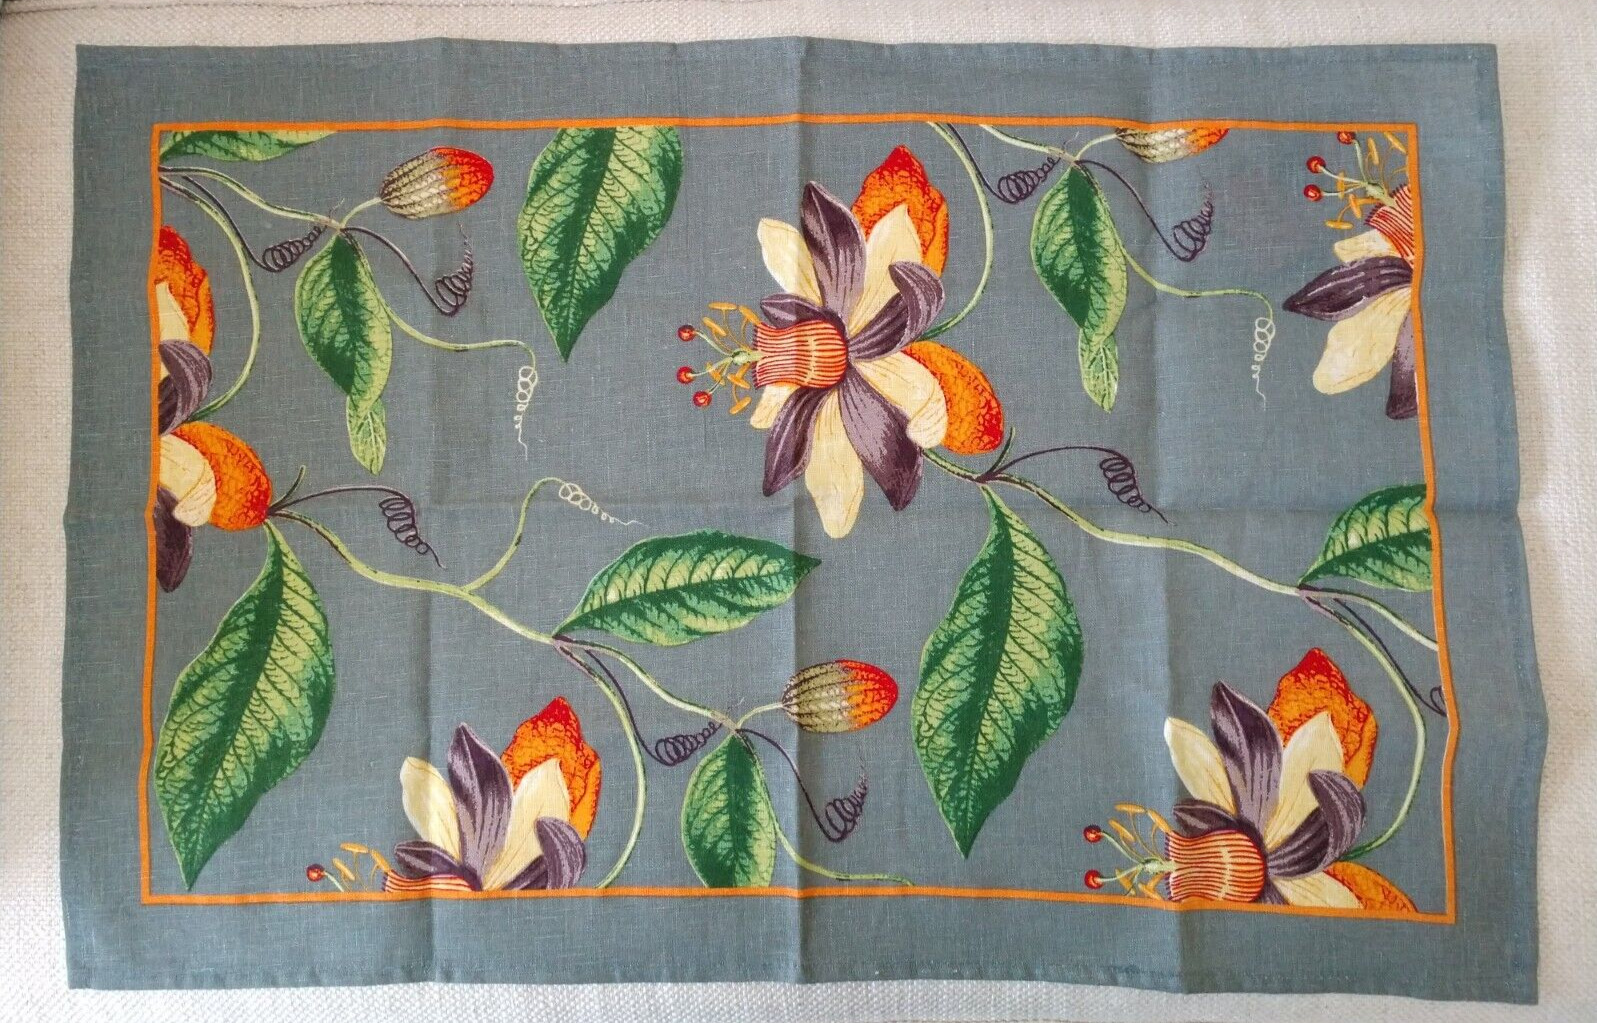 New Linen Dish Towel Royal Horticultural Society England 28 X 19 inches